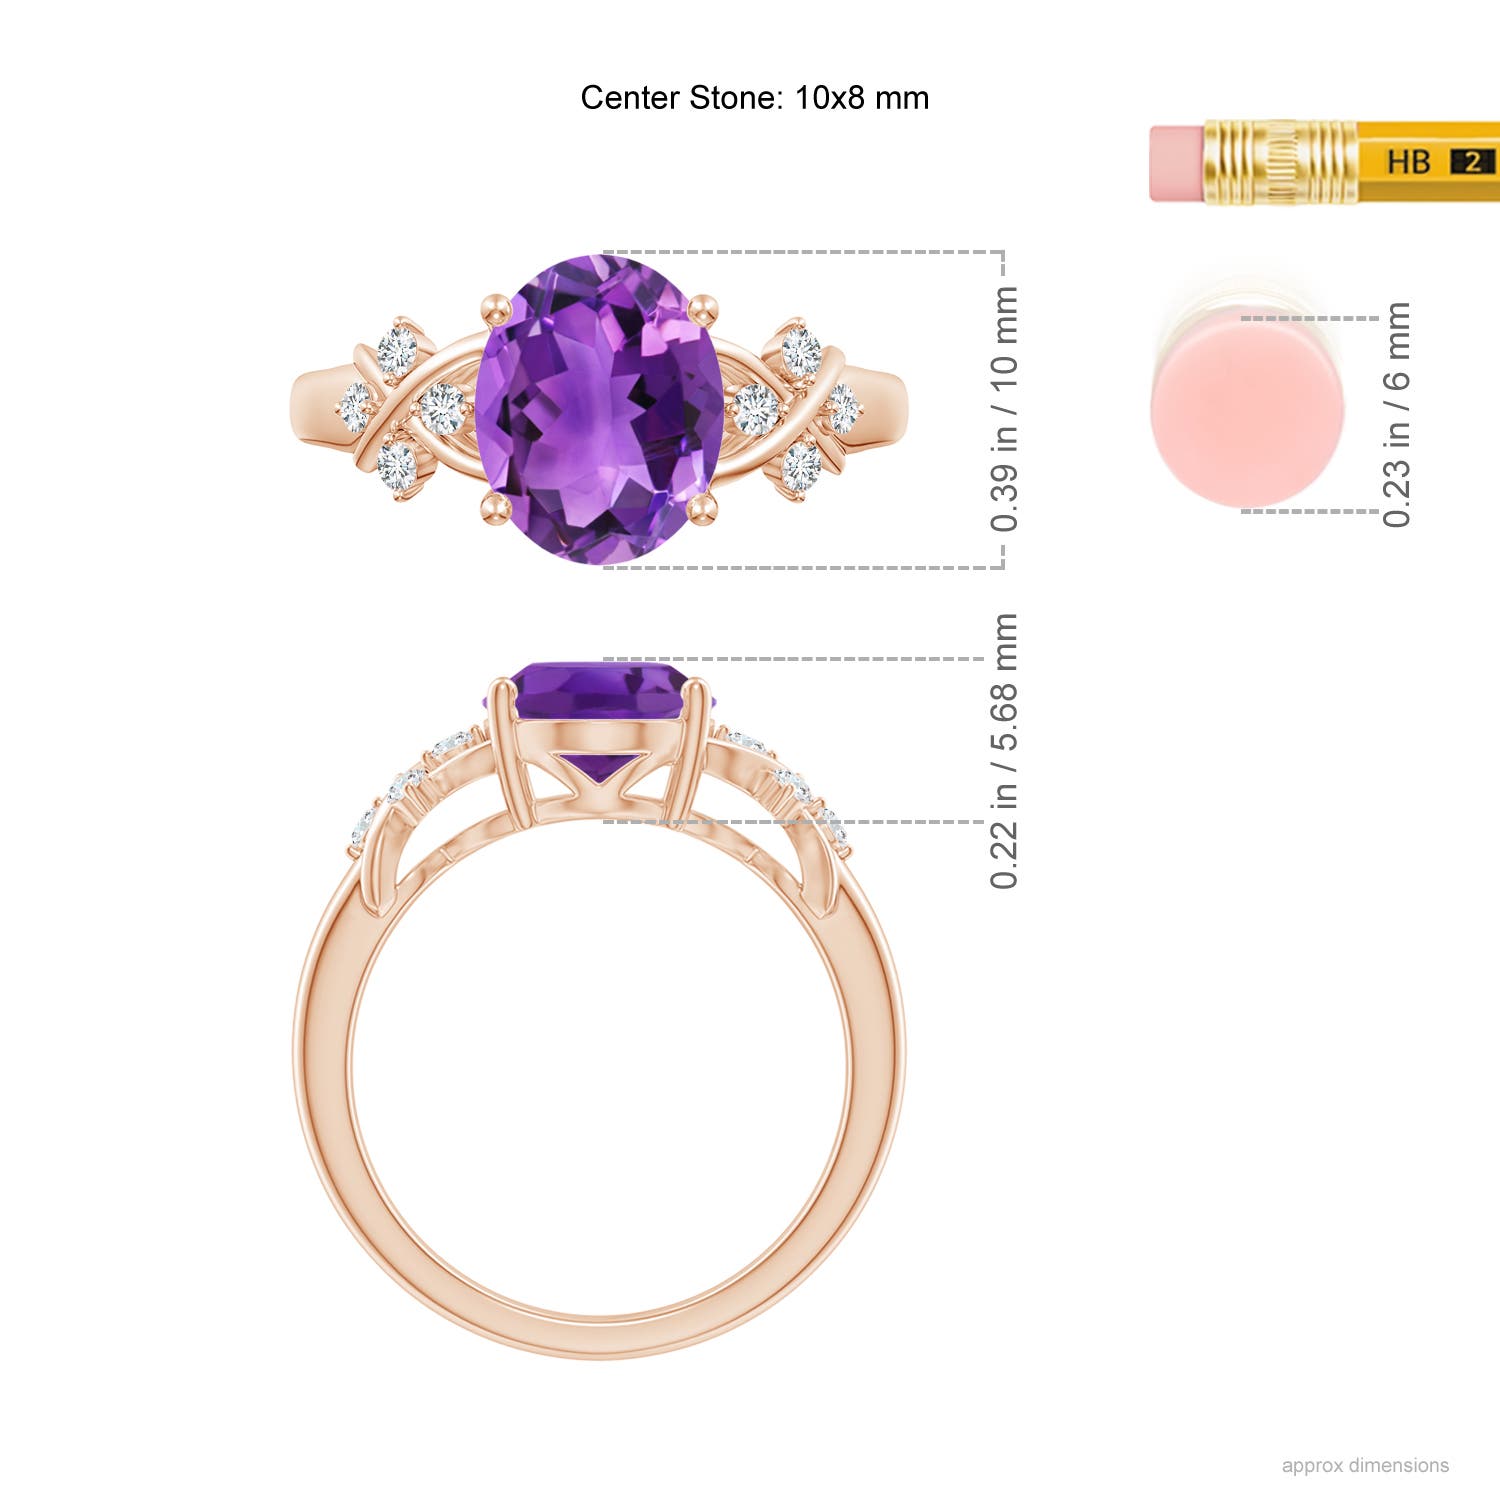 AAA - Amethyst / 2.45 CT / 14 KT Rose Gold